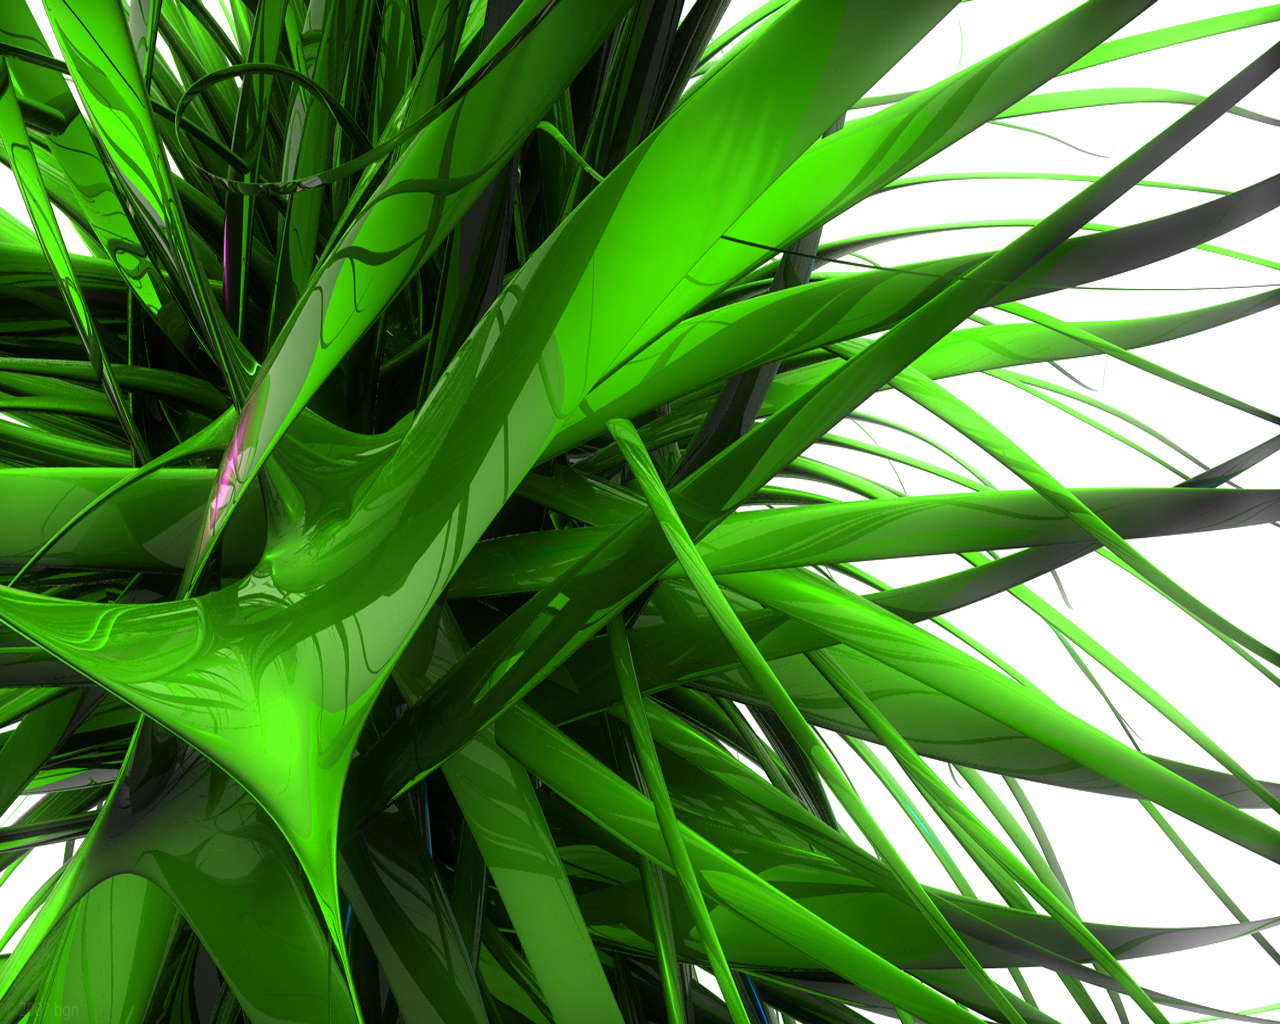 3d, green, abstract, cgi High Definition image